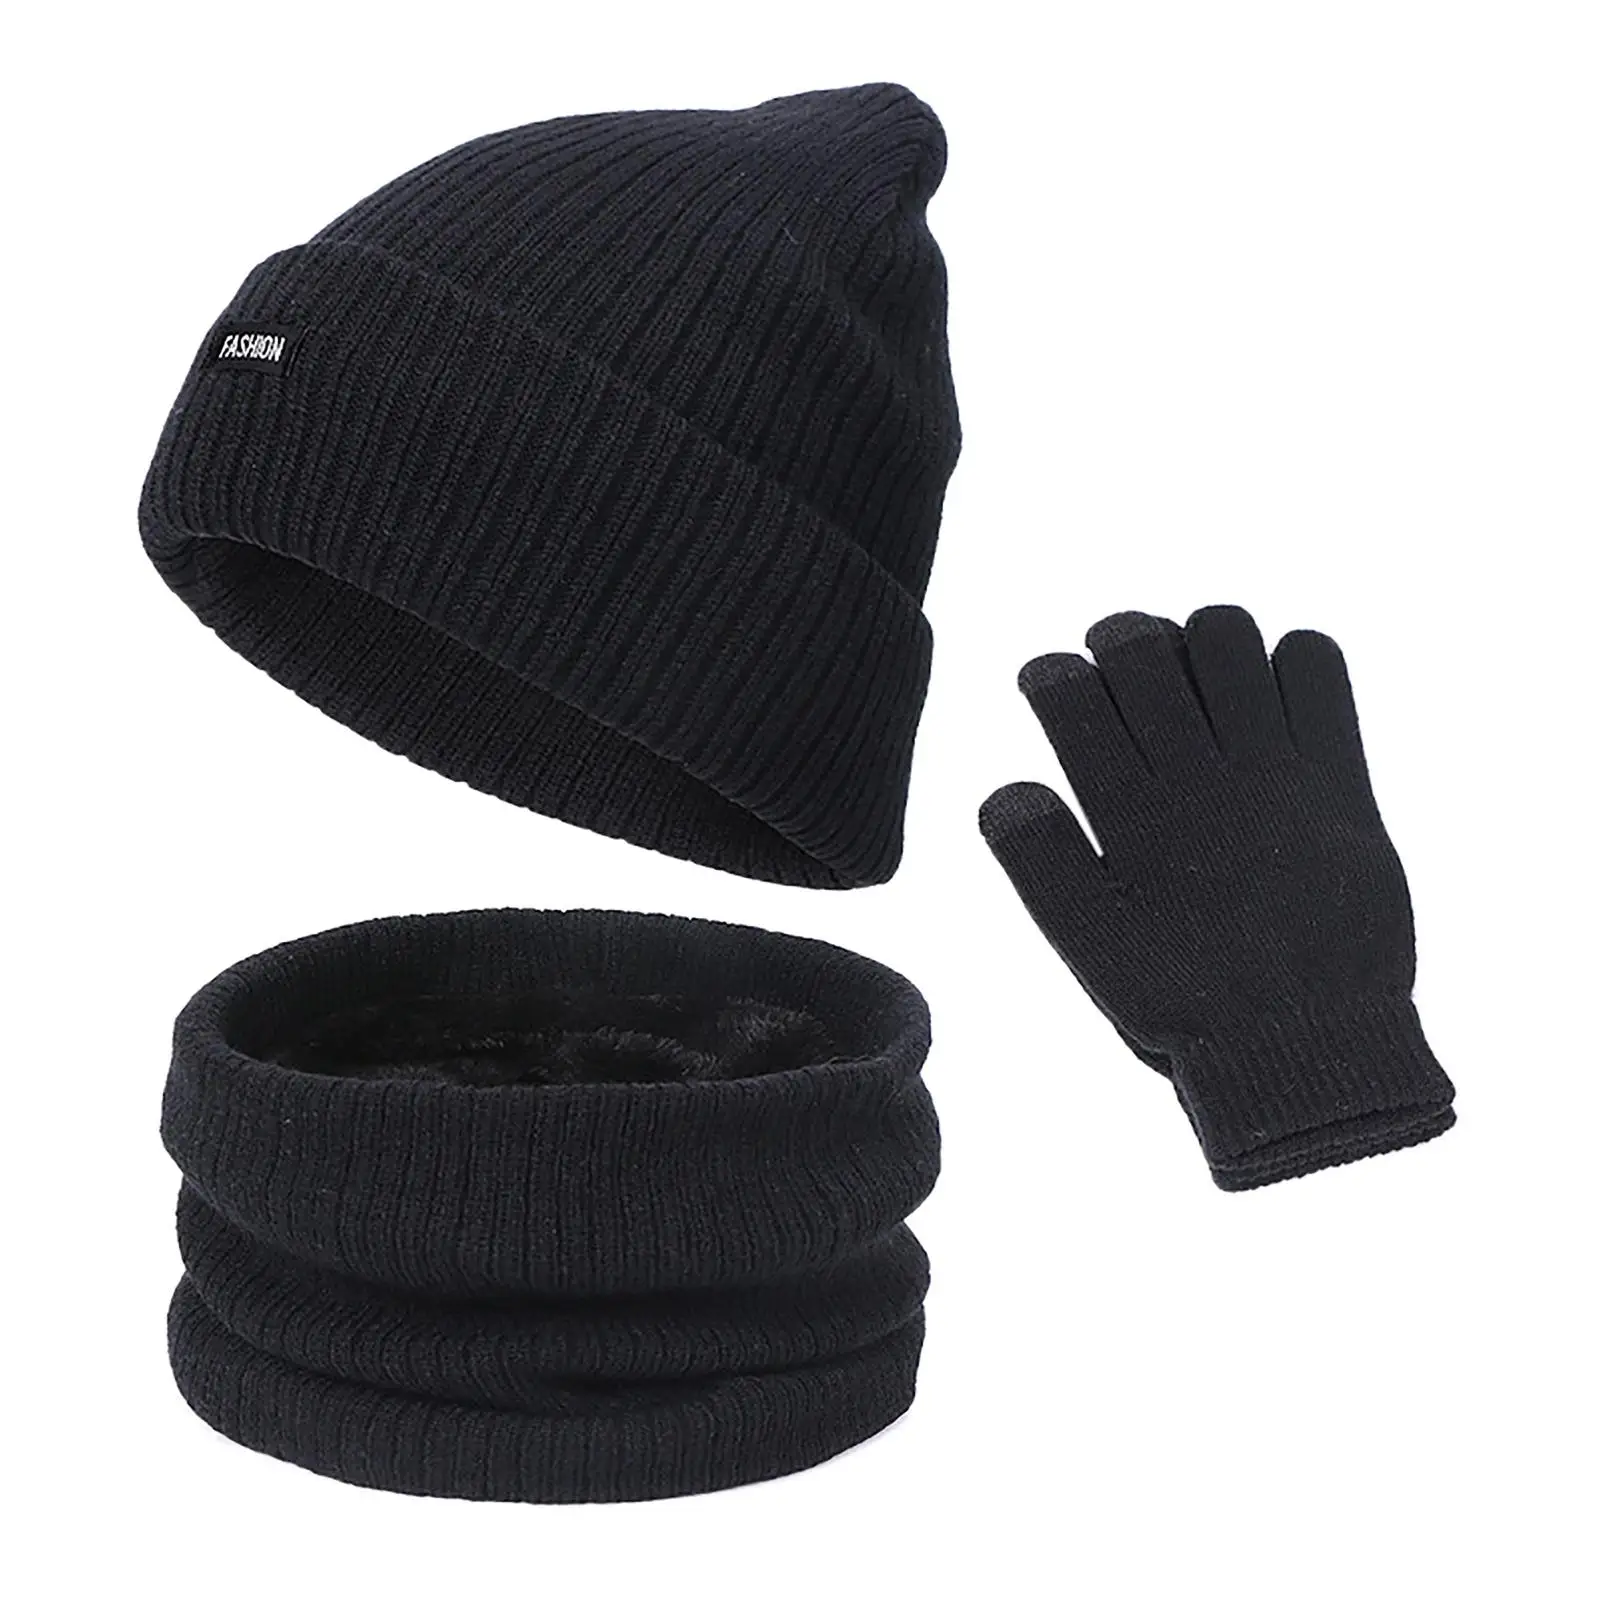 Men Women Beanie Hat Scarf Gloves Set Warm Winter Thermal Soft Thick Cotton for Ski Skating Daily Fishing Cold Weather